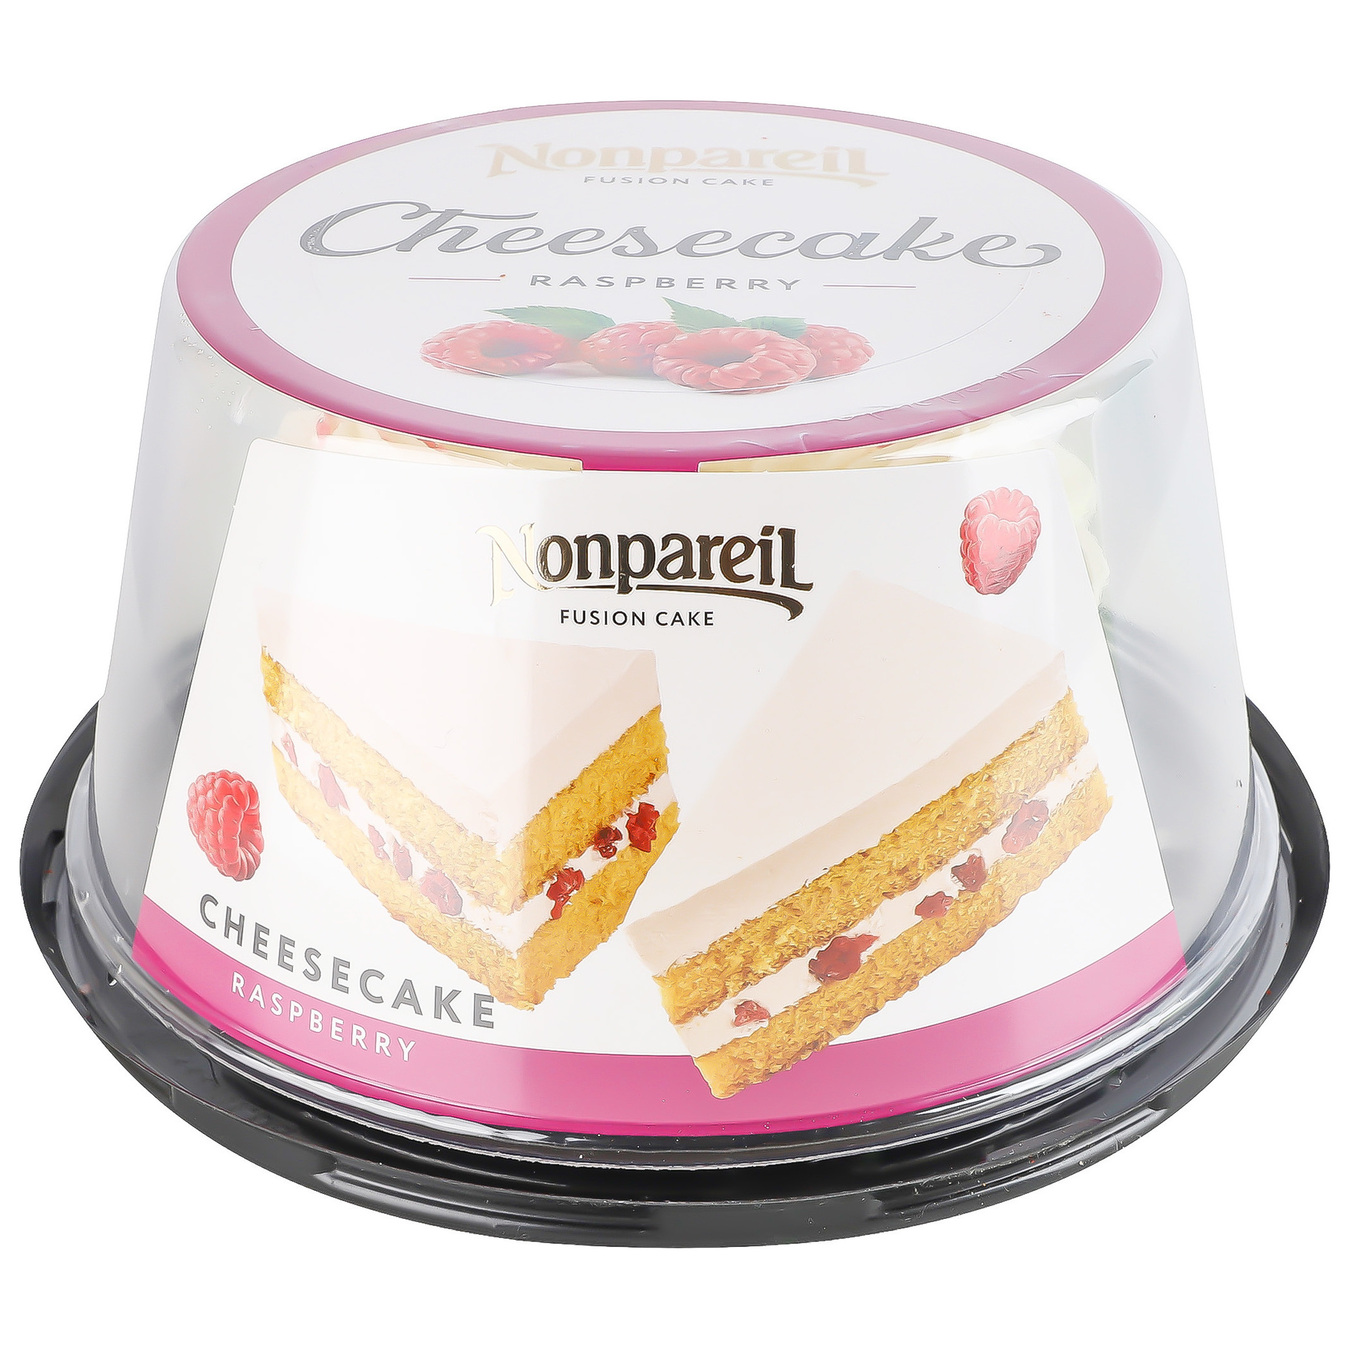 Nonparel with Raspberry Cheesecake 550g